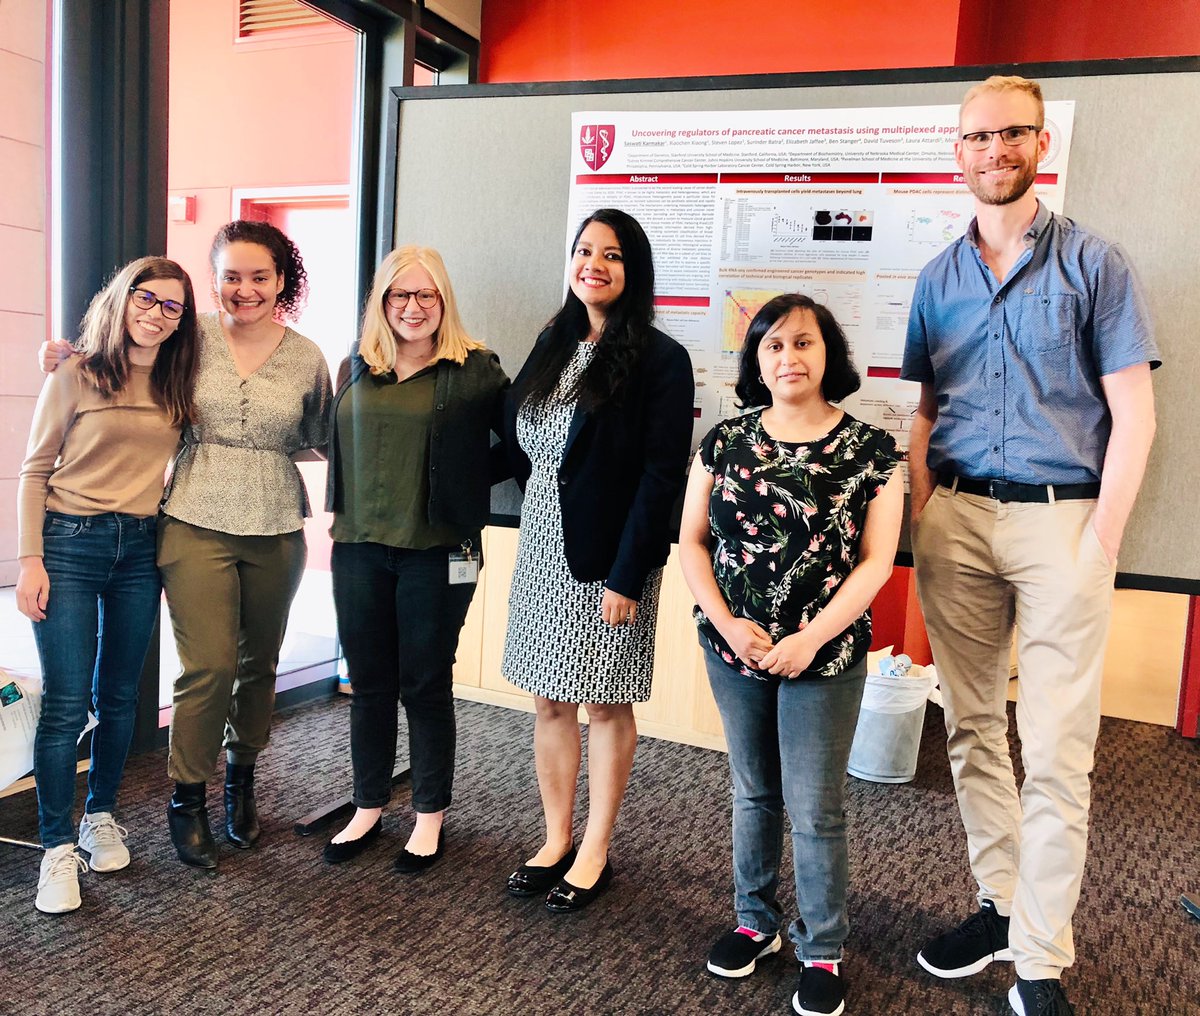 Had a fantastic time learning about ongoing research in #pancreaticcancer at the Pancreas Cancer Research Symposium at @Stanford. Was amazing to catch up with Sohinee from @MaraShermanLab and @hanson_kathrynj from the Attardi lab!!